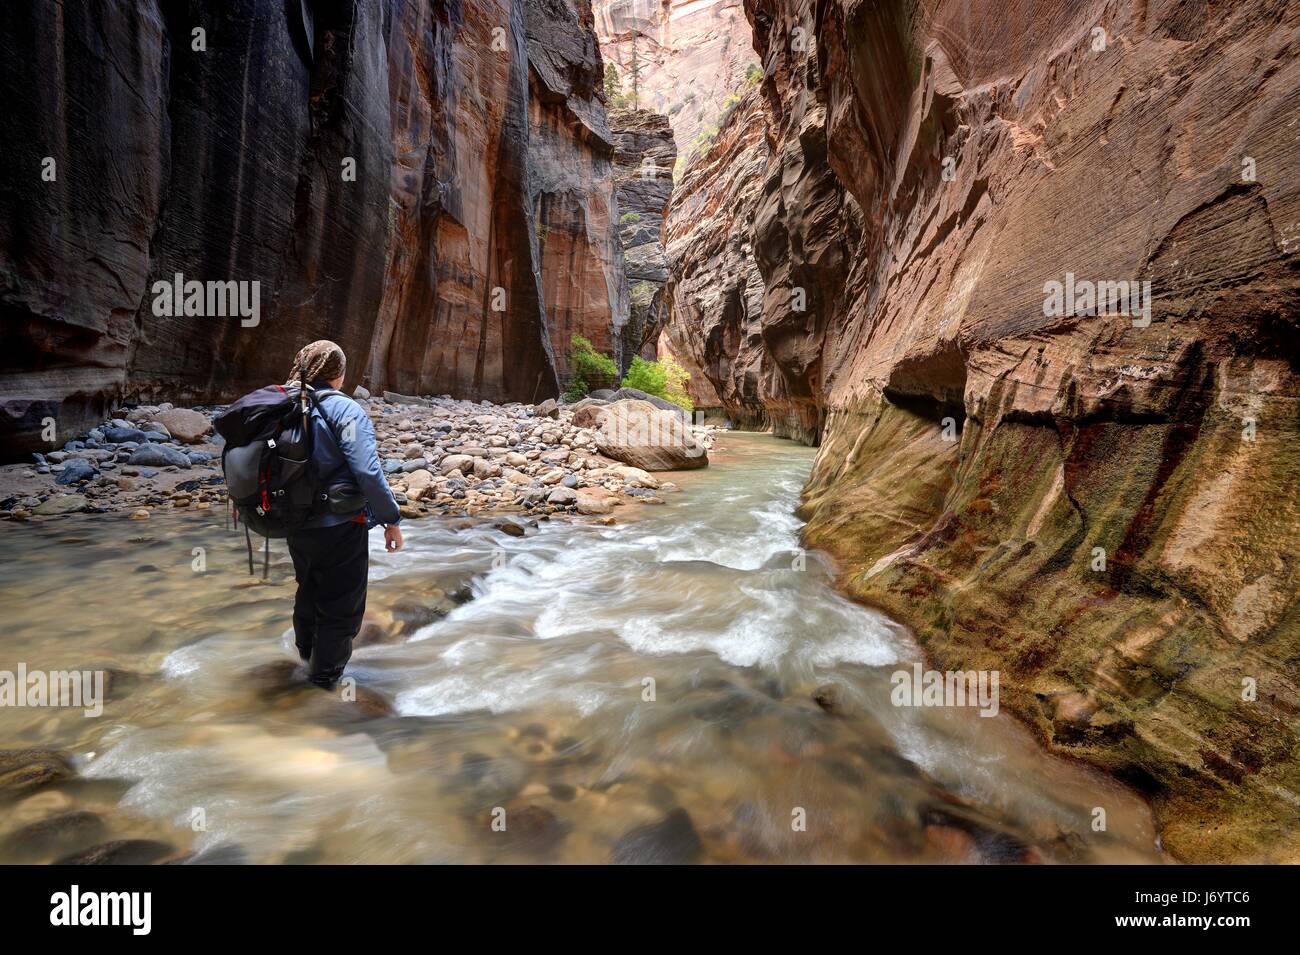 Hiker walking through river in the Narrows, Zion National Park, Utah, United States Stock Photo